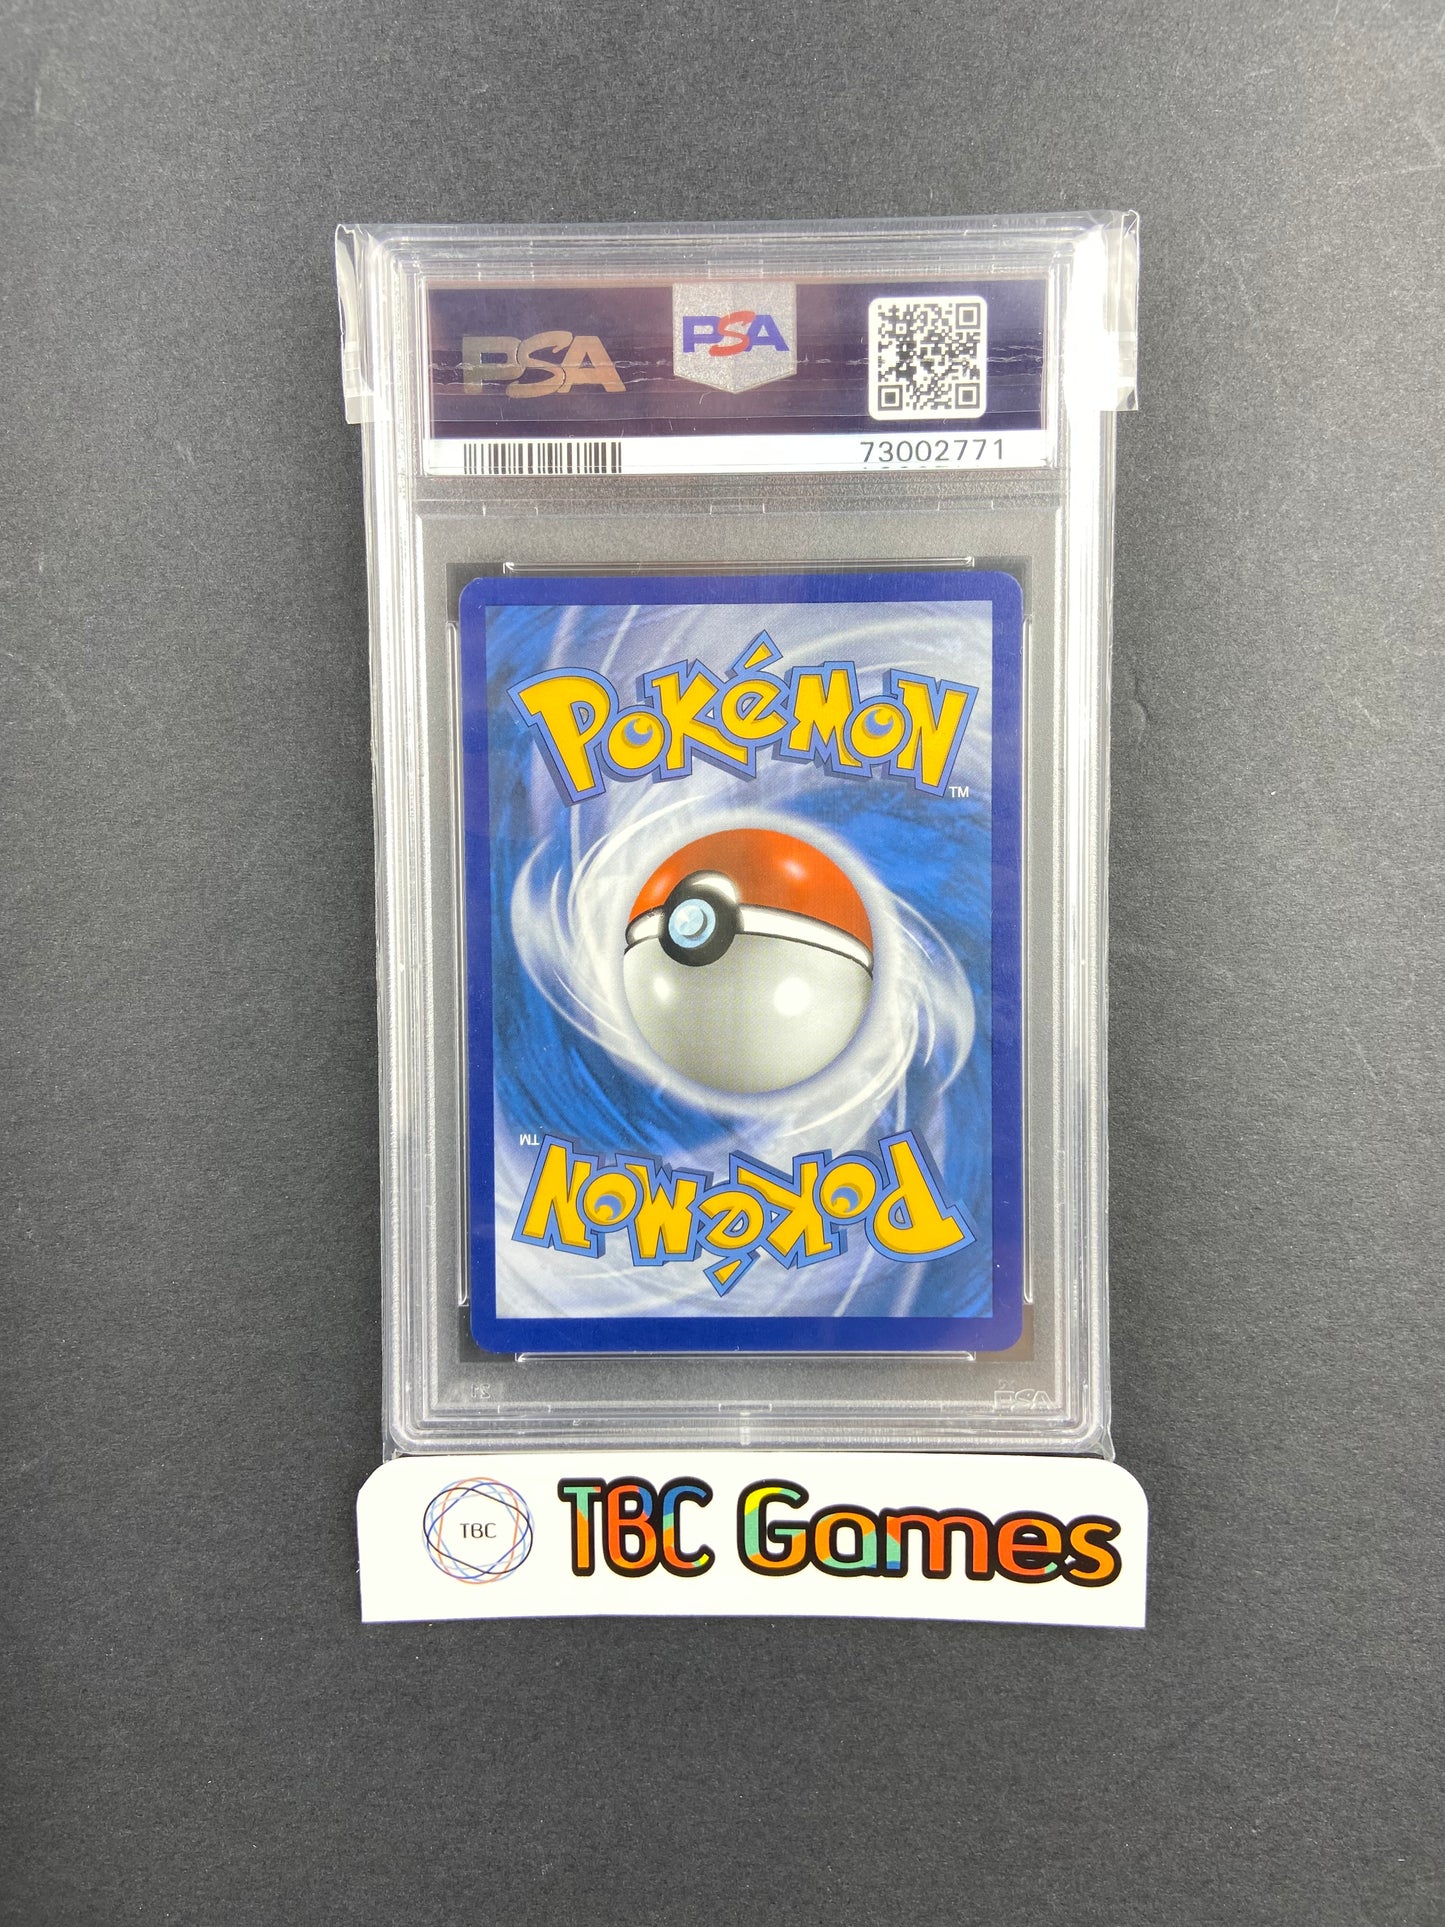 Charizard Celebrations Classic Collection 4/102 PSA 9